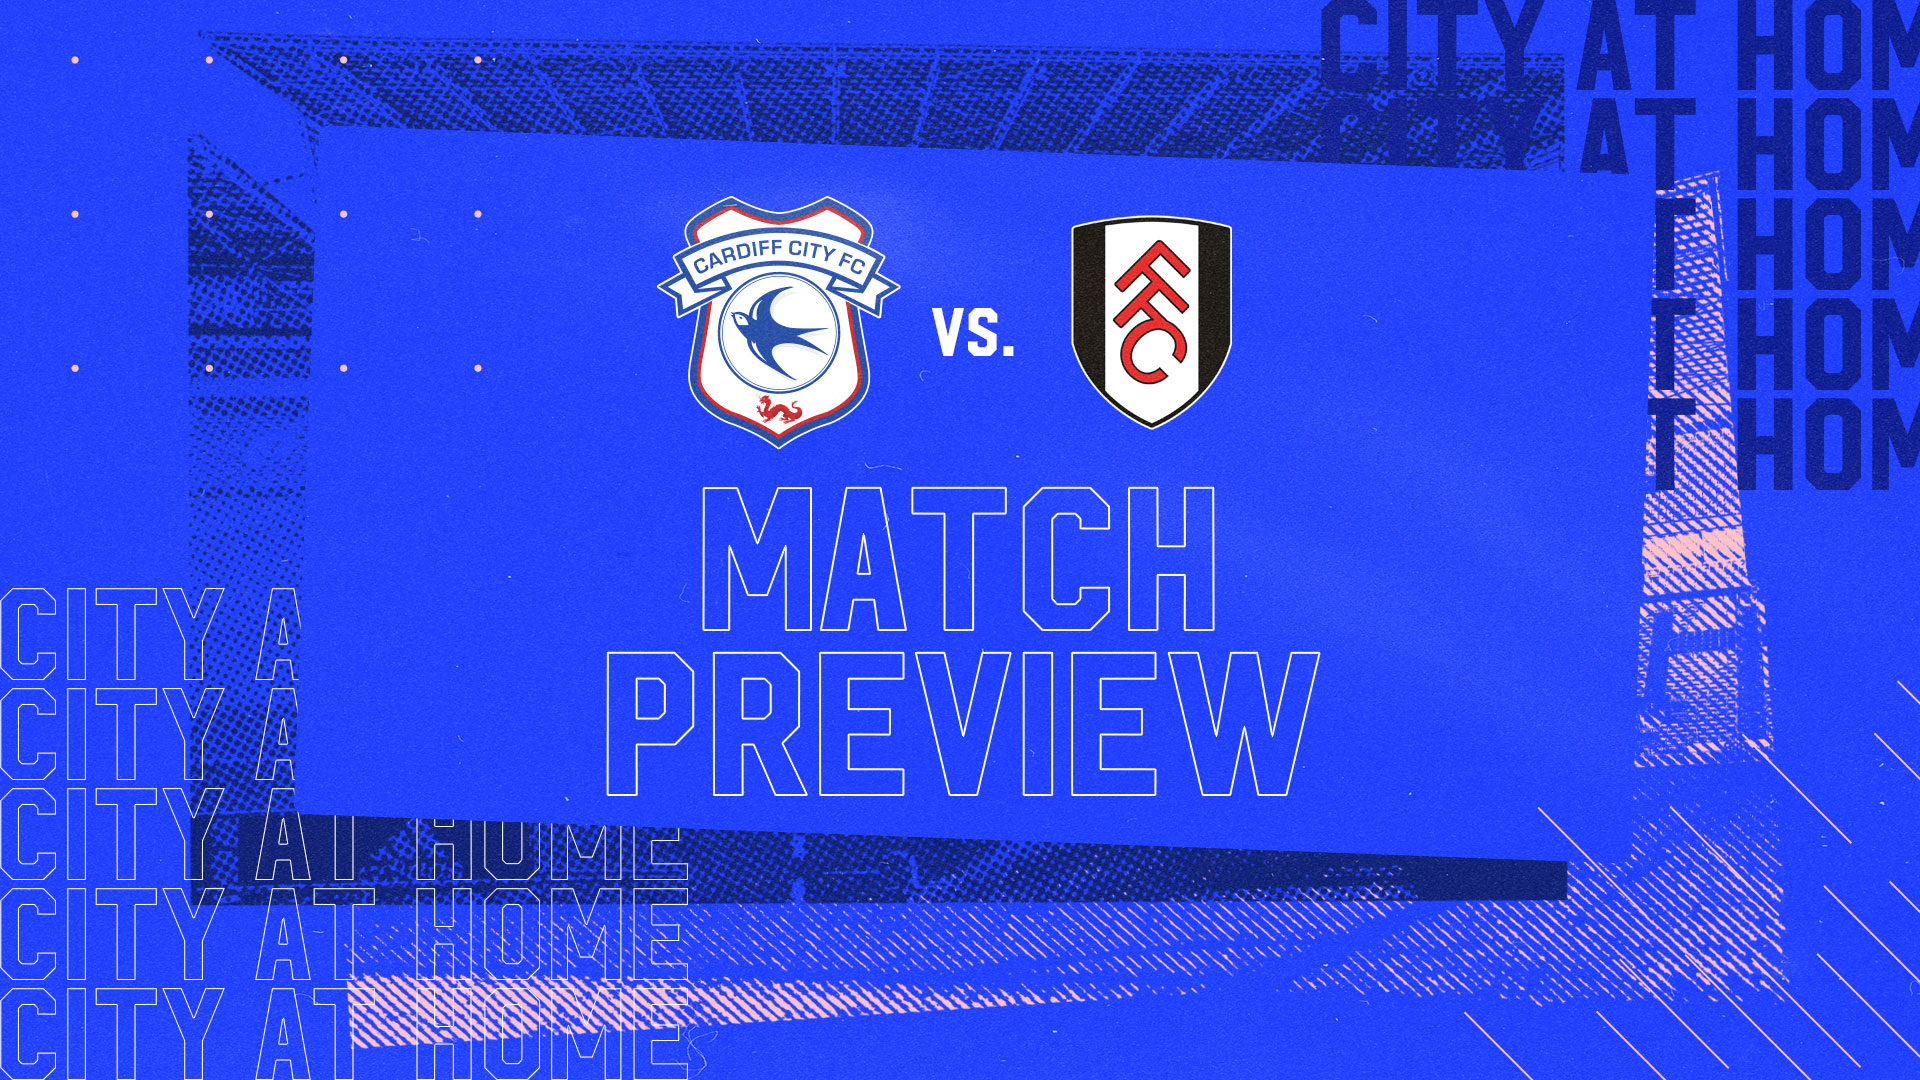 The Bluebirds host Fulham this weekend...